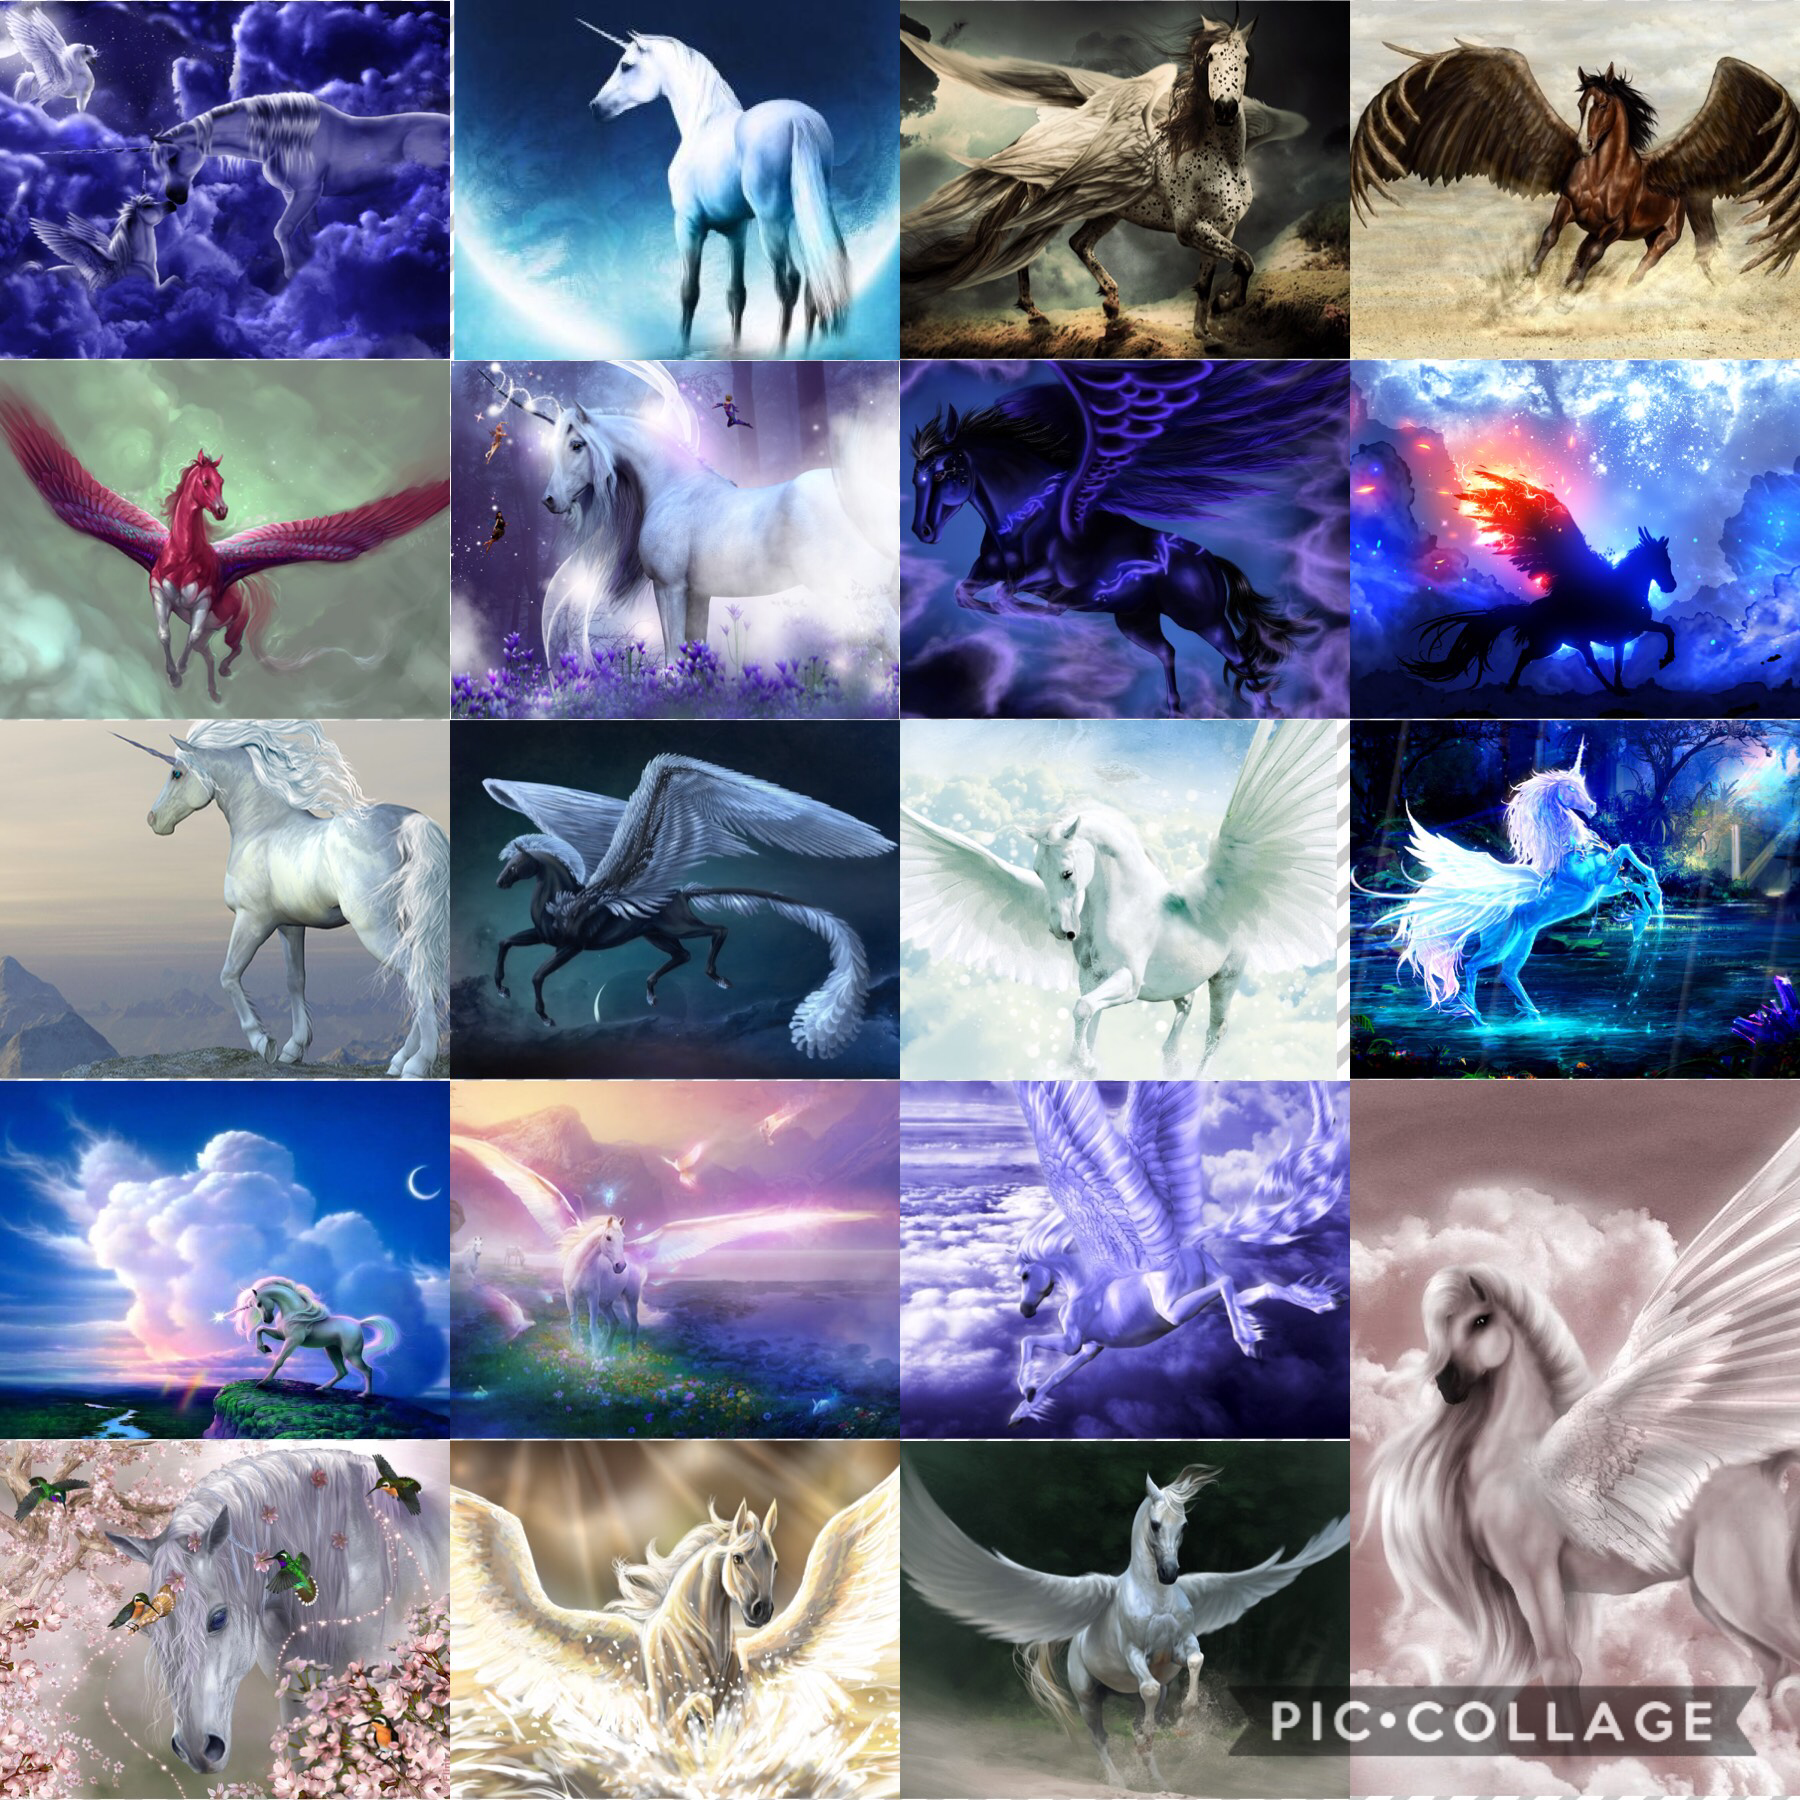 Unicorns & Pegasus 4 Life!!!!!!!!!!!!! ❤️❤️❤️❤️❤️❤️❤️❤️❤️ (Tap)


If you don't already know.....I love Pegasus & Unicorns

❤️❤️❤️❤️❤️❤️❤️❤️❤️❤️❤️💜💜💜💜💜💜💜💜💜💜💜💜💜💞💞💞💞💞💕💕💕💕💕💕💓💓💓💓💓💓💓❣️❣️❣️❣️❣️❣️❣️❣️❣️❣️💘💘💘💘💘💘💖💖💖💖💖💖💖💖💖💖💖💝💝💝💝💝💝💝💝💟💟💟💟💟💟💟💟💟💟💟💟💟